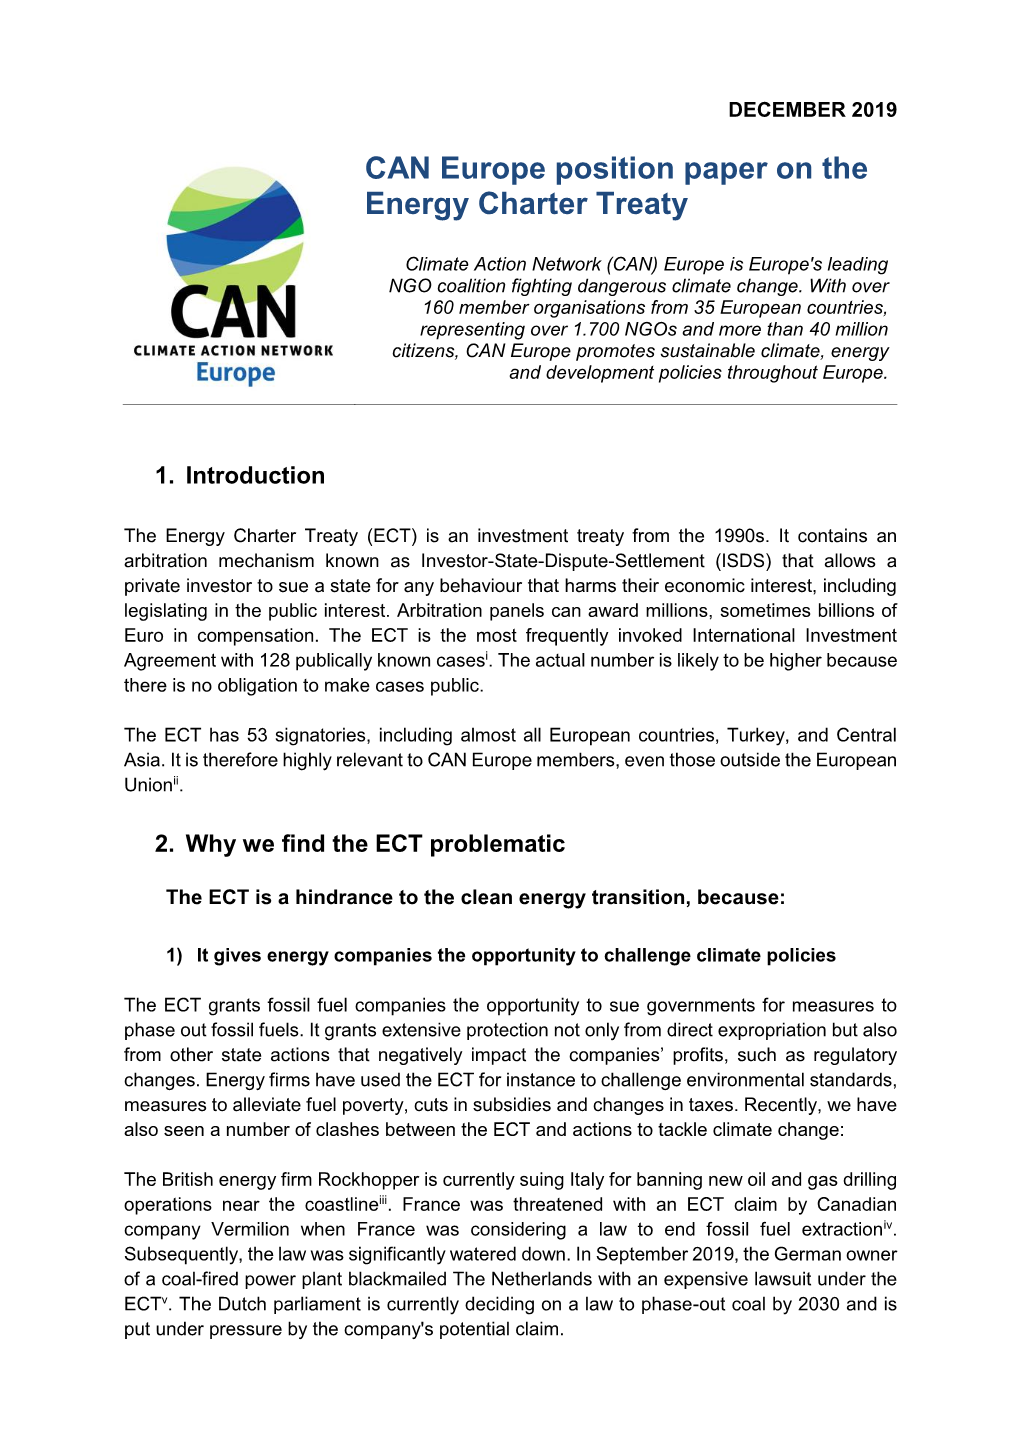 CAN Europe Position Paper on the Energy Charter Treaty